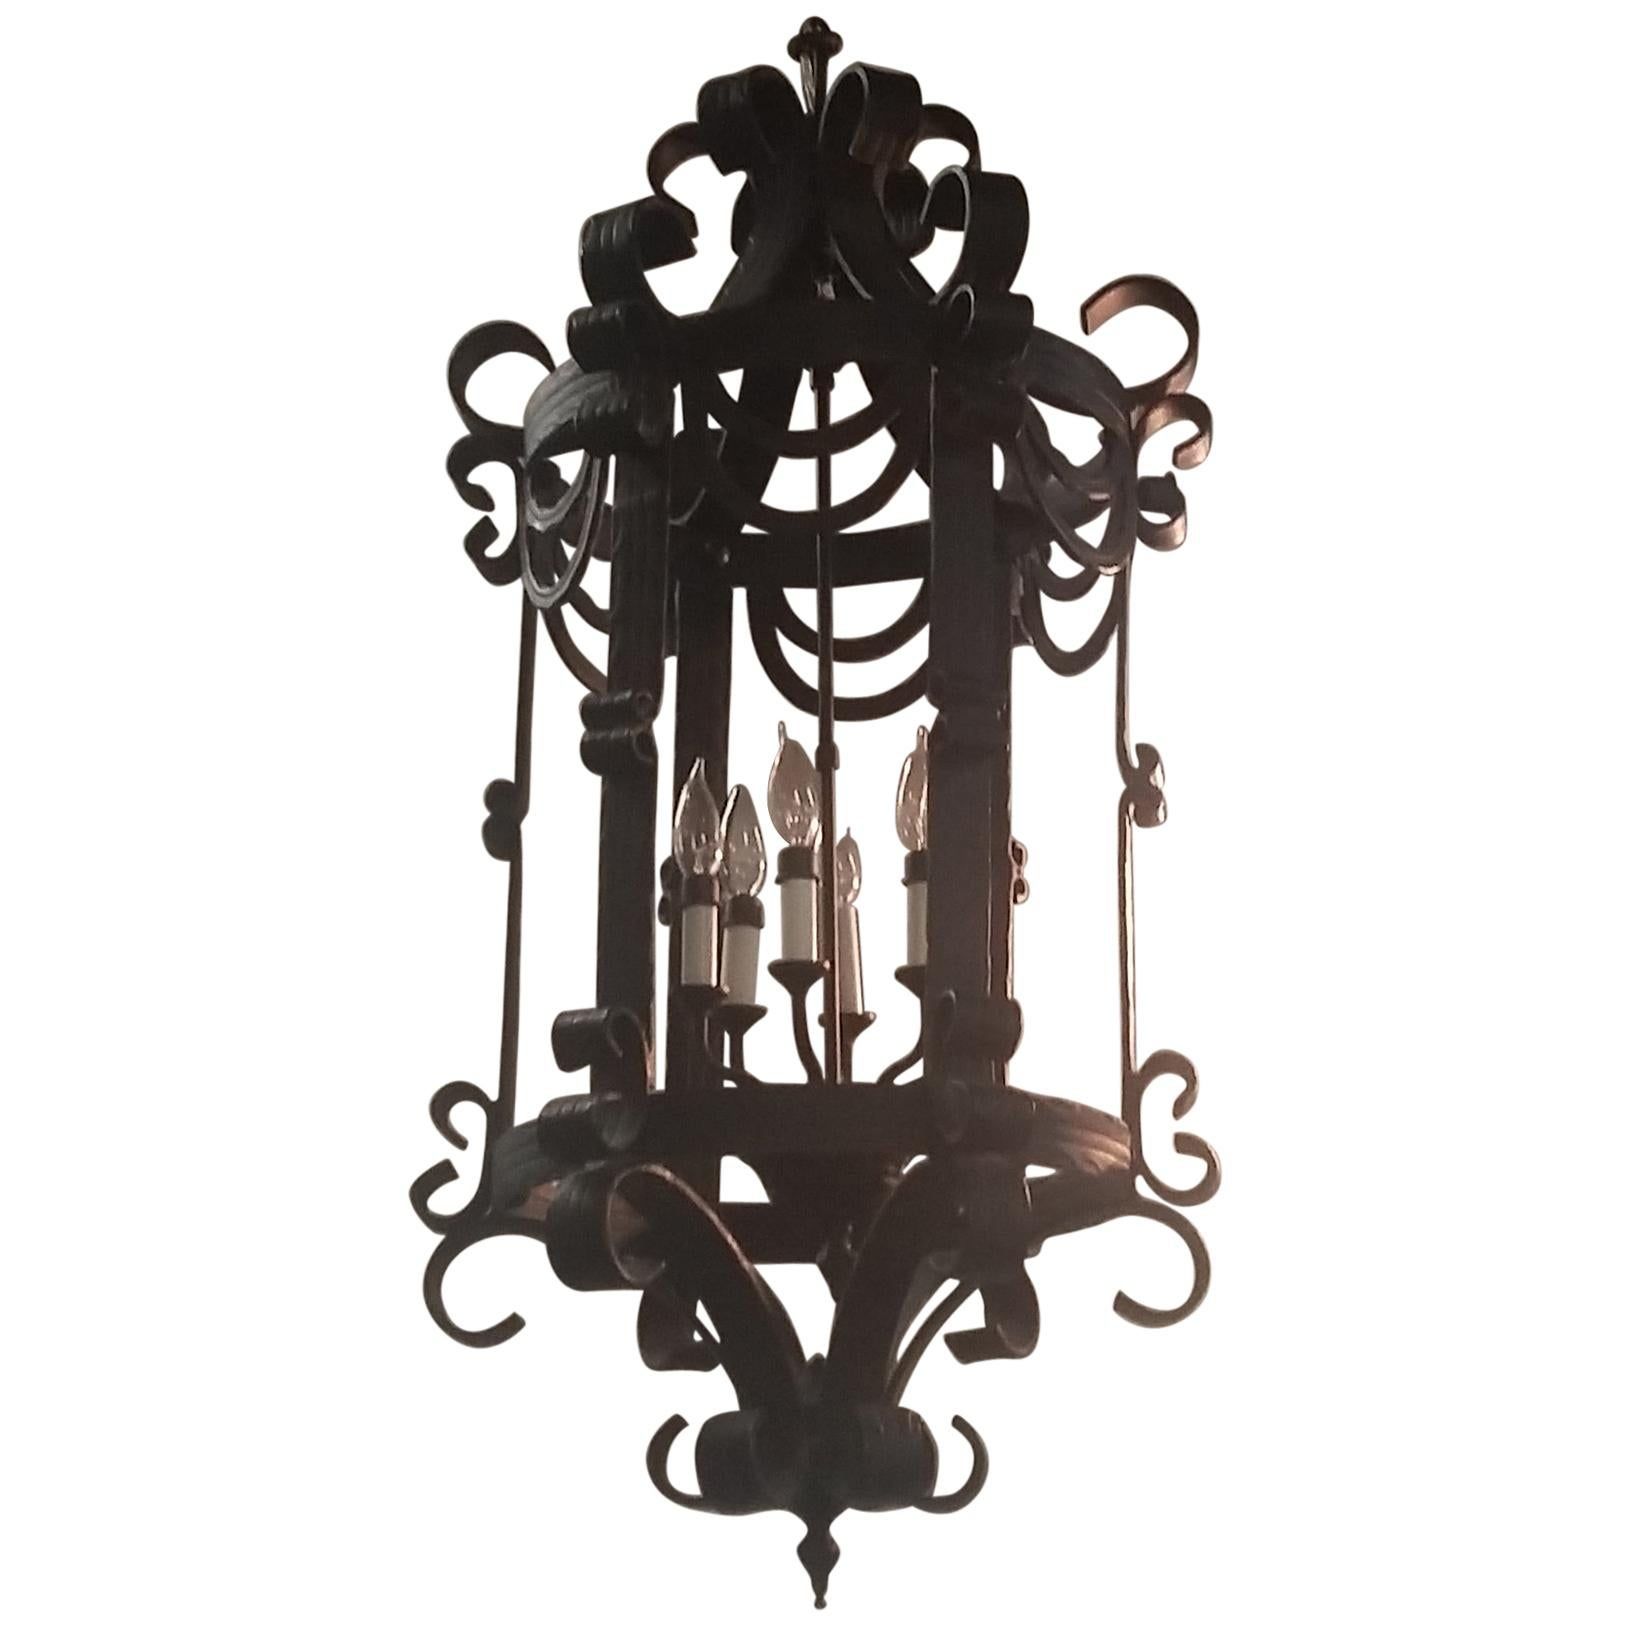 Classic Gothic Scroll Lantern Ribbon Style Wrought Iron Chandelier Hand  Forged For Sale At 1stdibs Intended For Forged Iron Lantern Chandeliers (View 6 of 15)